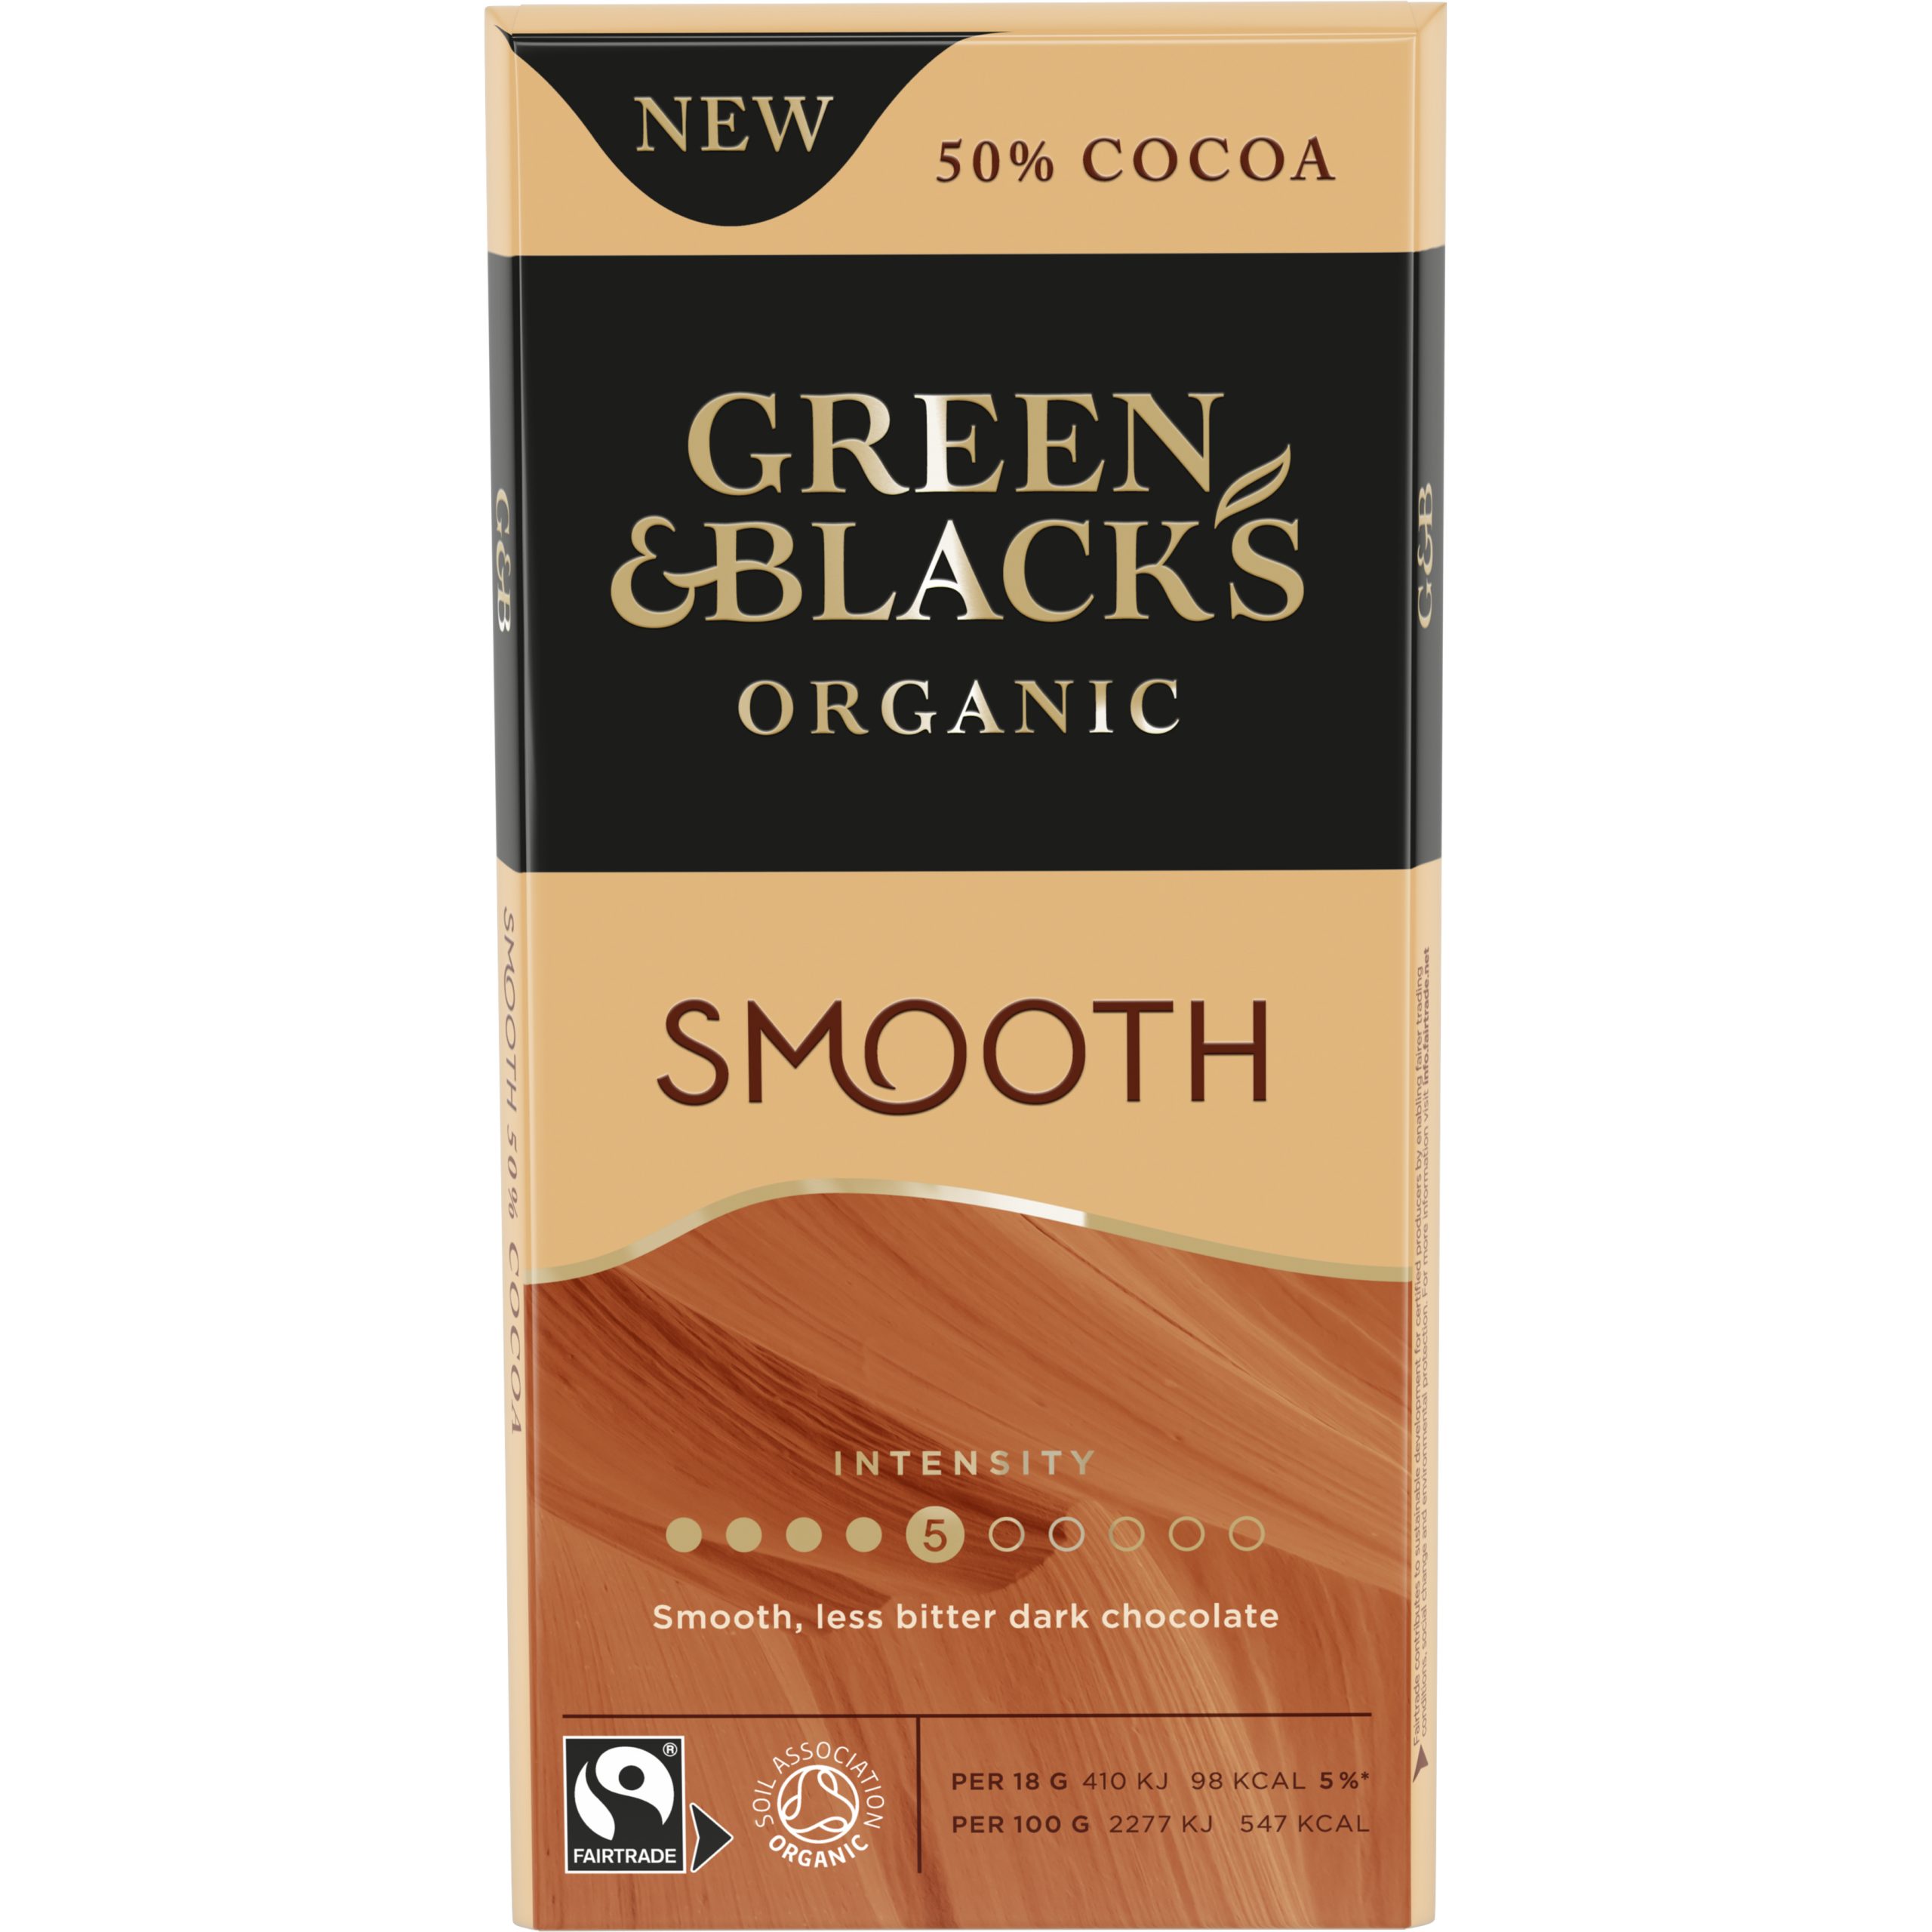 Smooth new addition to Green & Black’s organic range announced